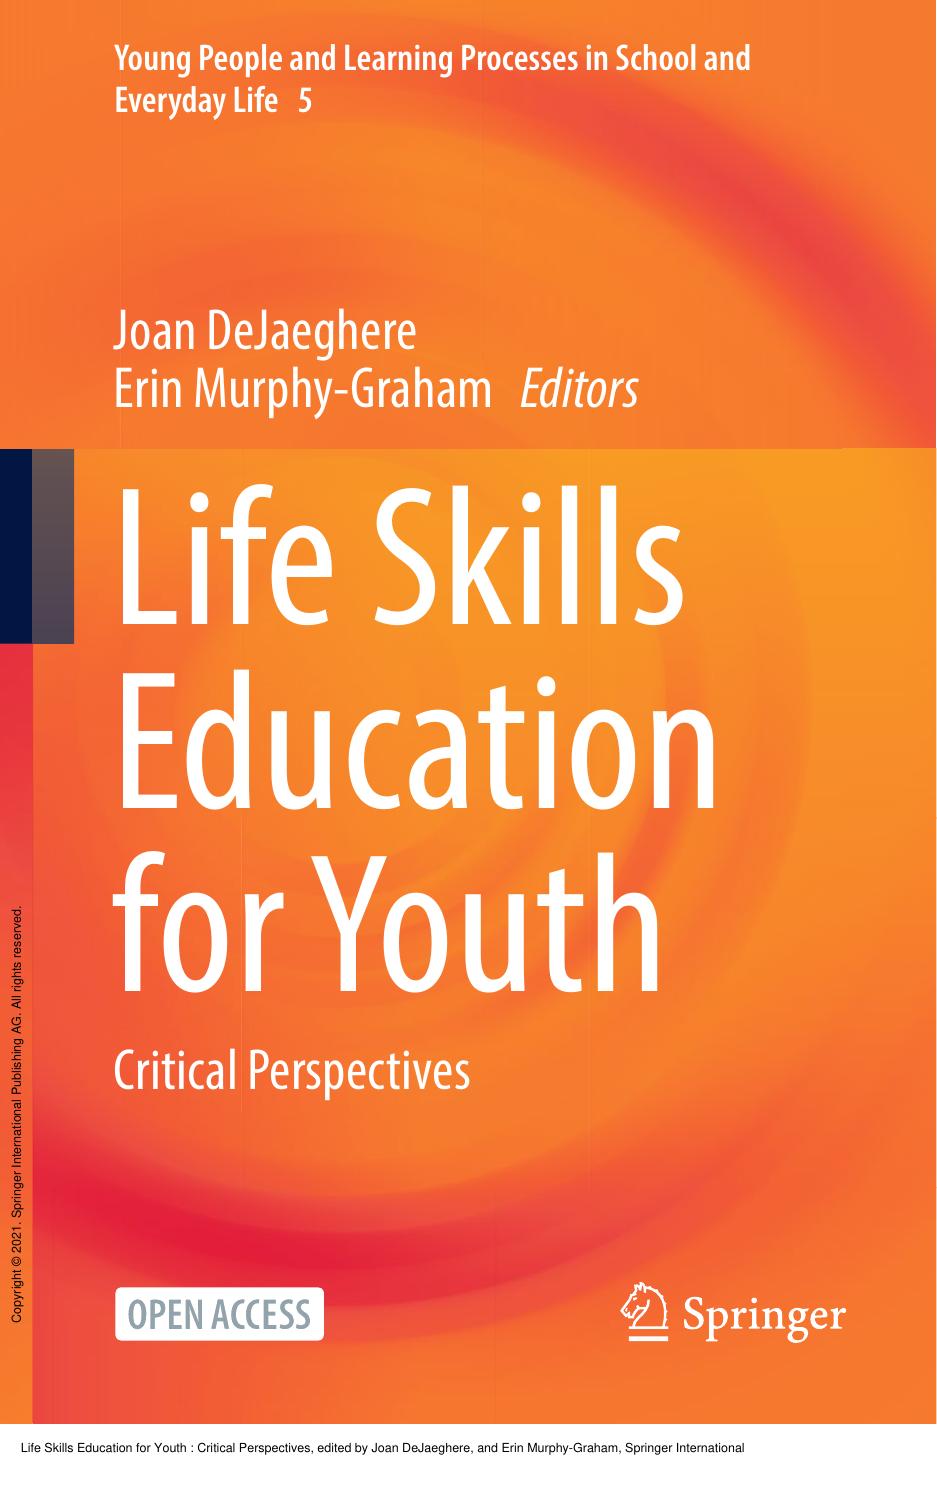 Life Skills Education for Youth : Critical Perspectives by Joan DeJaeghere; Erin Murphy-Graham